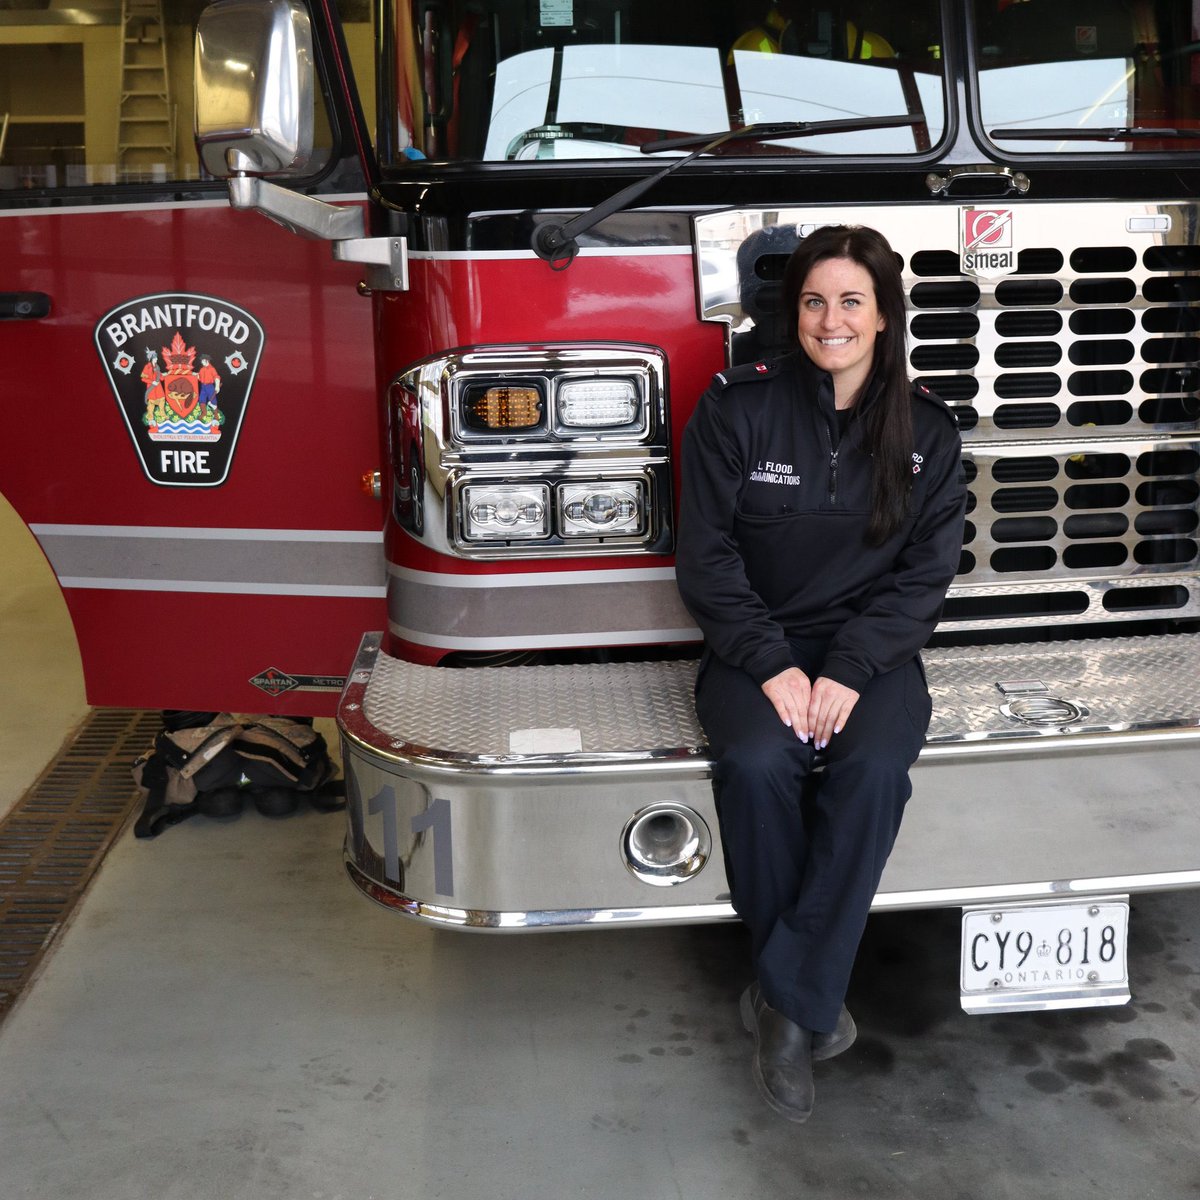 In honour of National Public Safety Telecommunicators Week we would like to introduce Fire Communications Operator (FCO) Flood! FCO Flood is in her 3rd year of service with the Brantford Fire Department. Thank-you for your service! #NPSTW